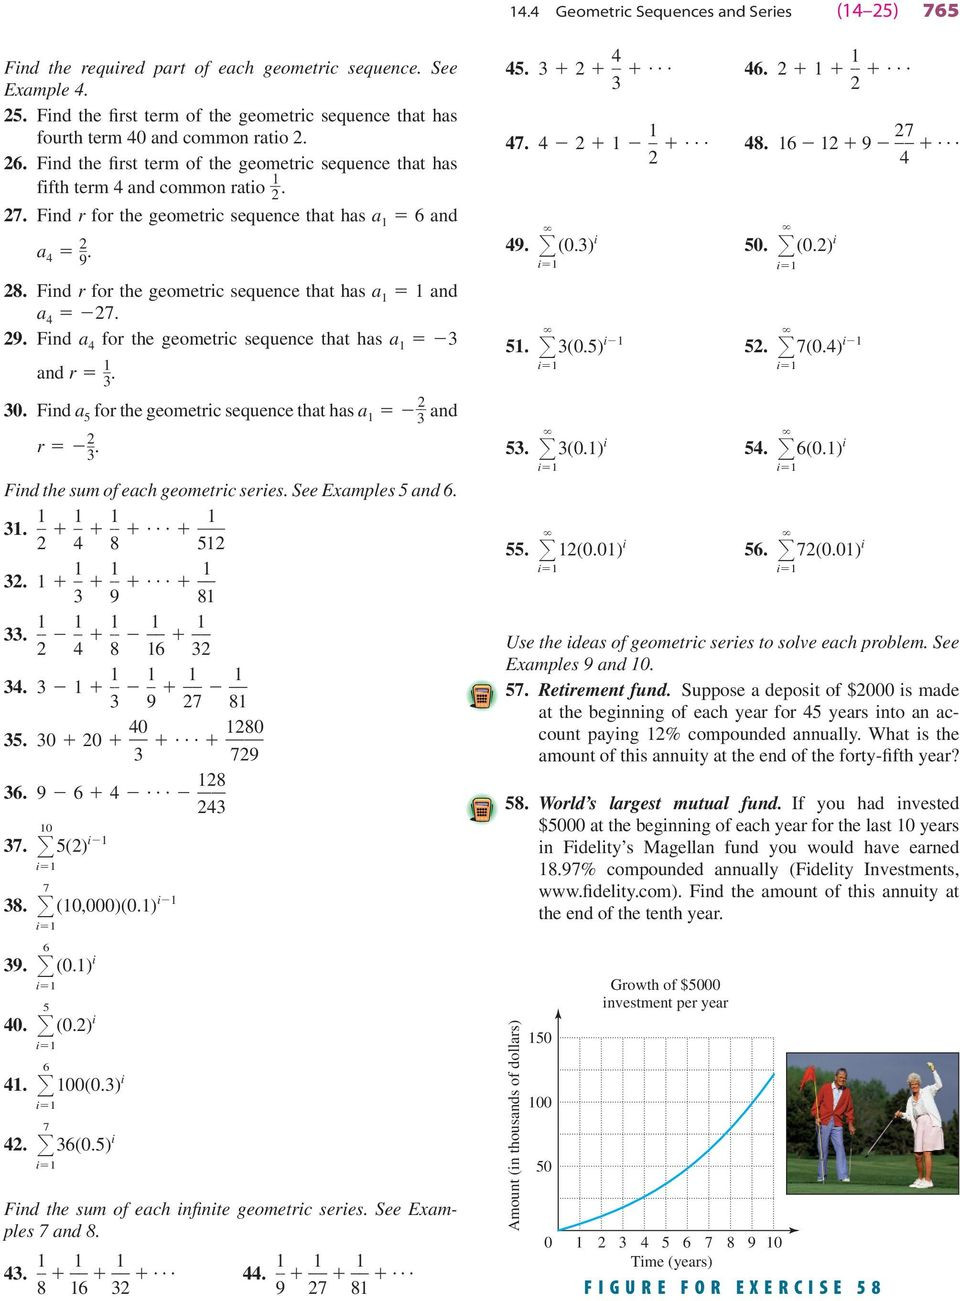 Sequences and Series Worksheet Answers Geometric Sequences and Series Pdf Free Download